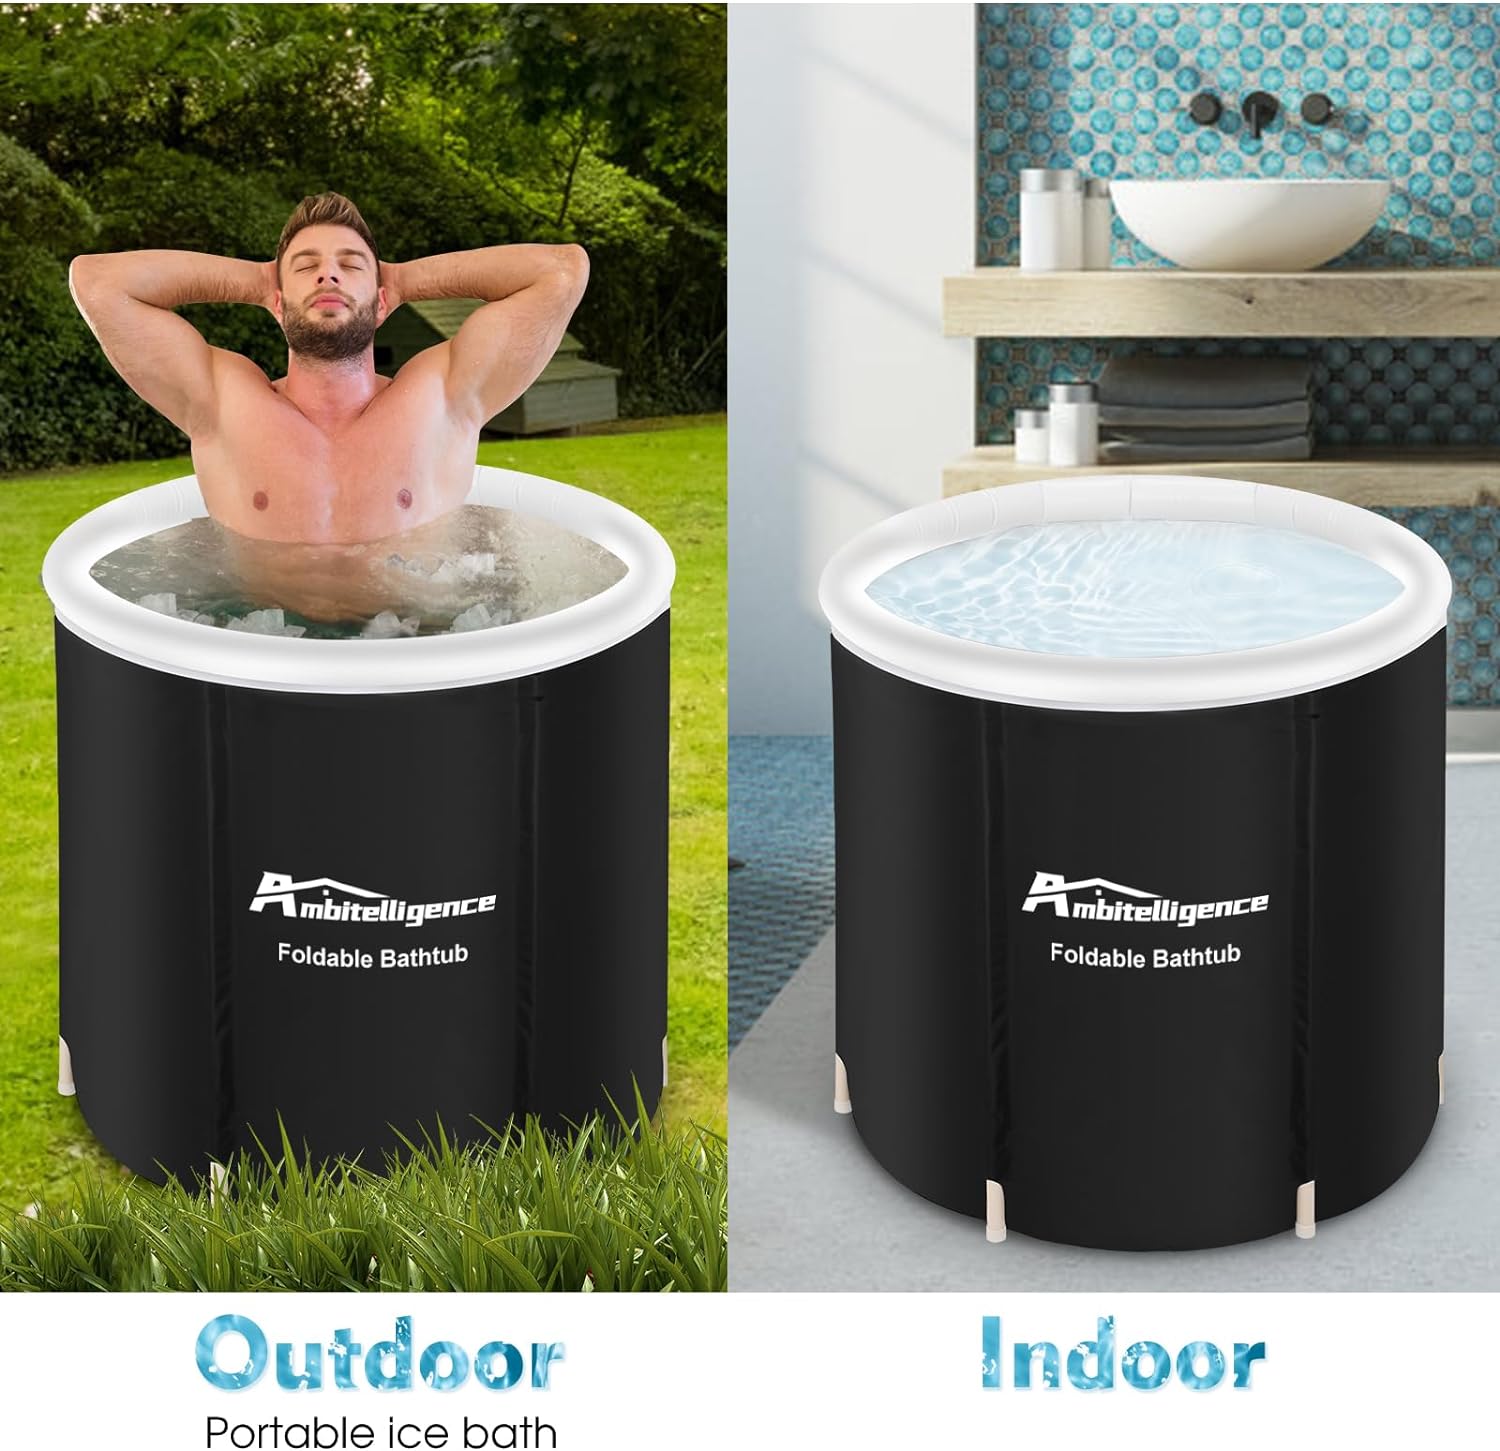 Outdoor Portable Cold Water Ice Tub Foldable Bathtub Therapy - Black Tie Gadget